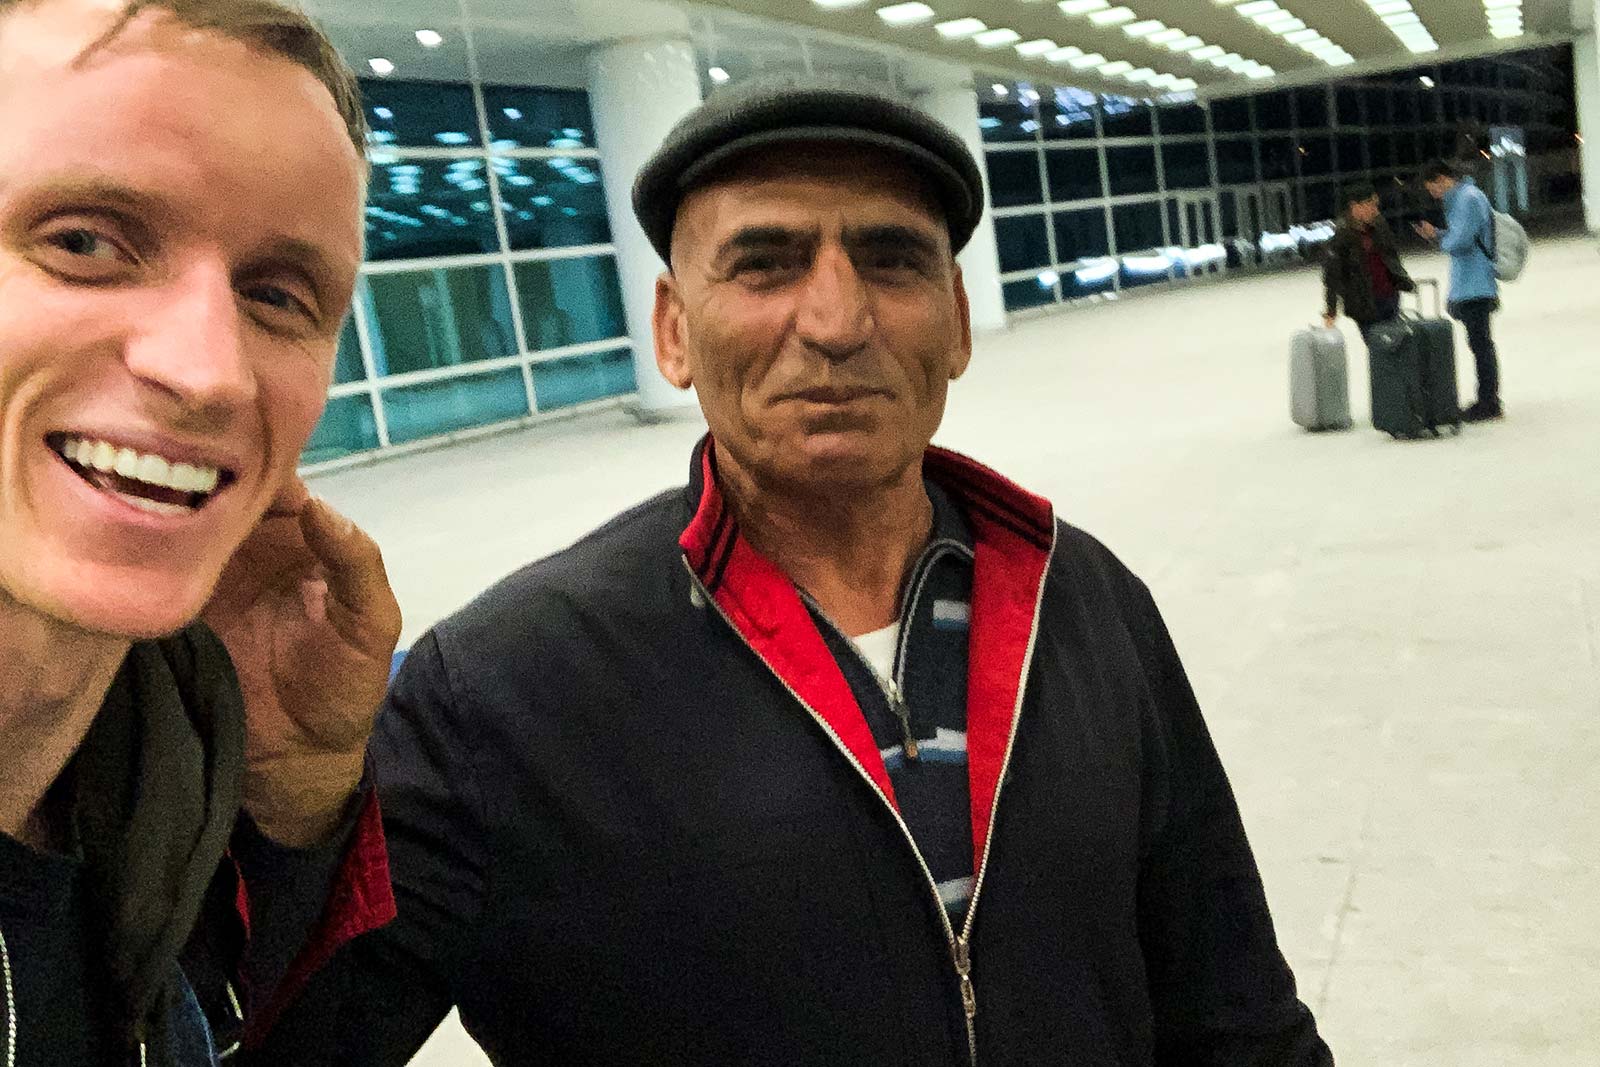 David Simpson and taxi driver at the airport in Ashgabat, Turkmenistan. Confused taxis and pick ups